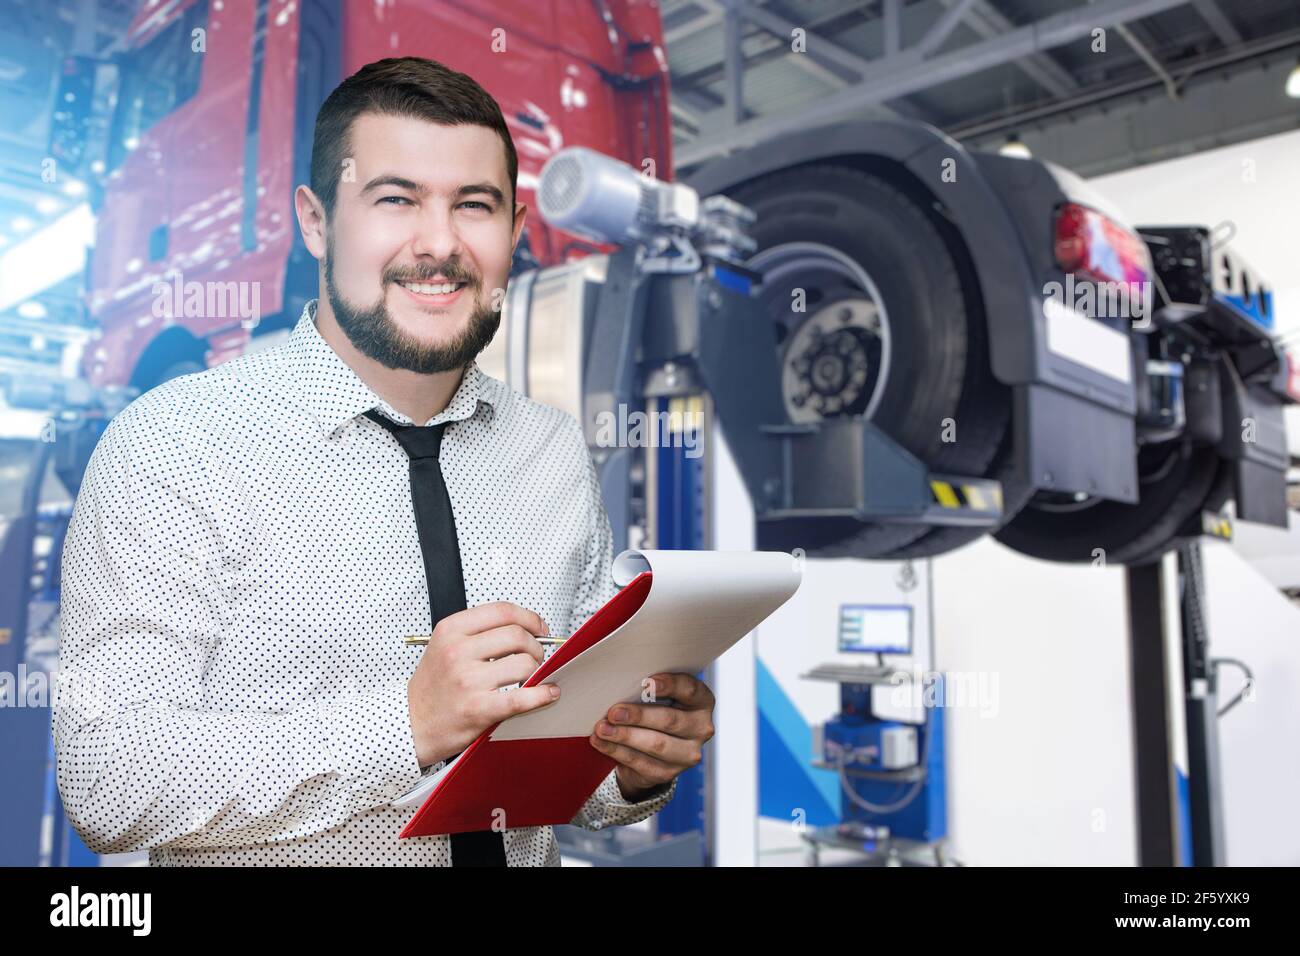 Serviceman with notepad on the background of the truck in the garage Stock Photo